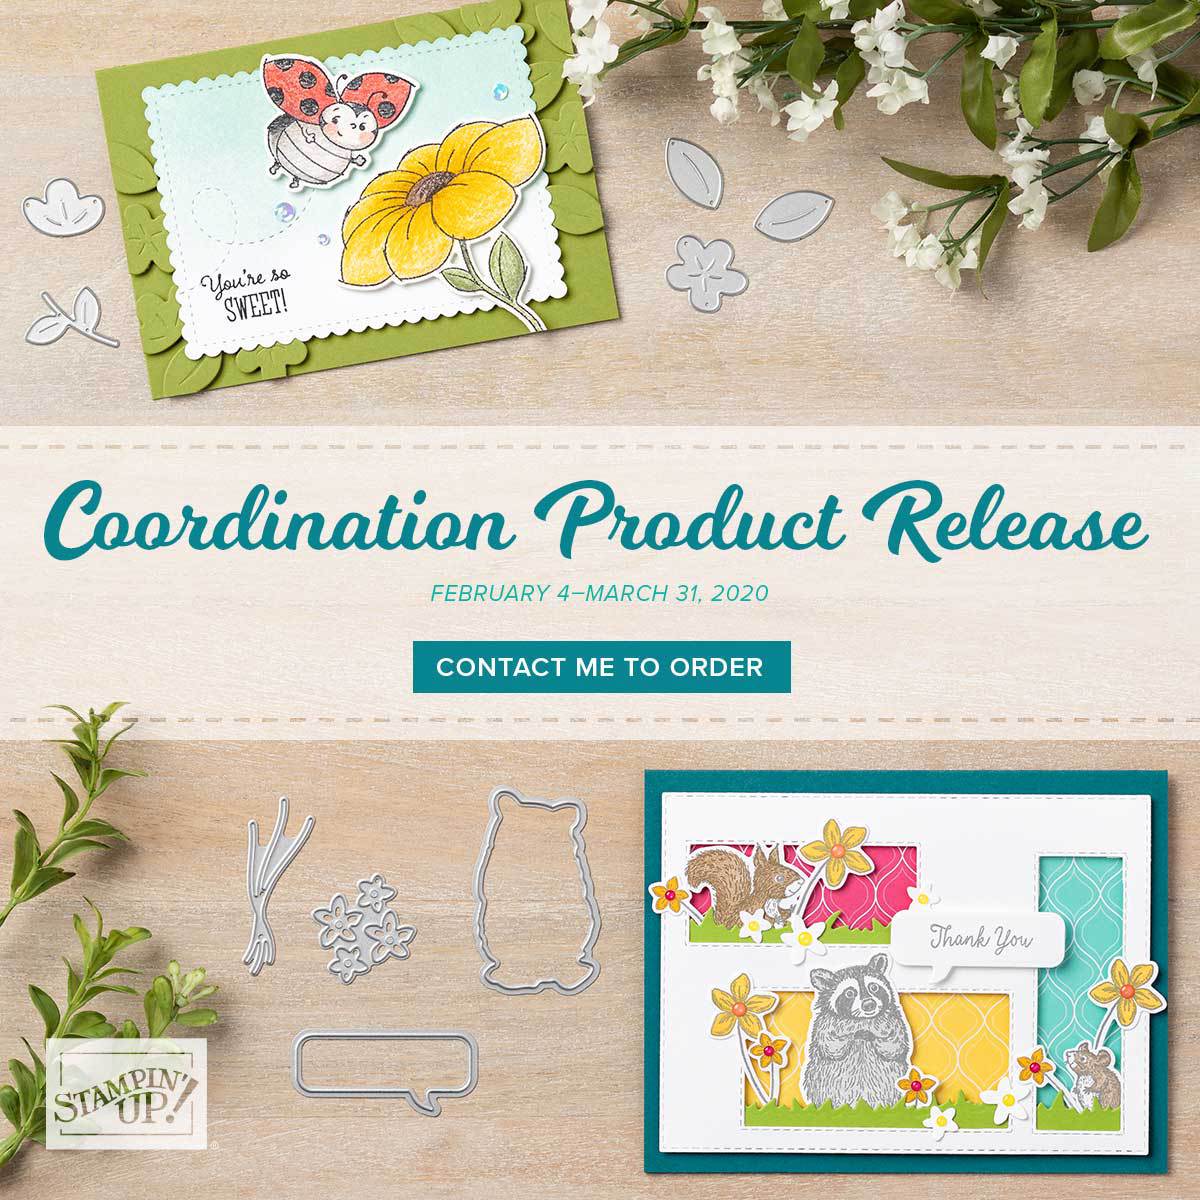 Coordination Product Release